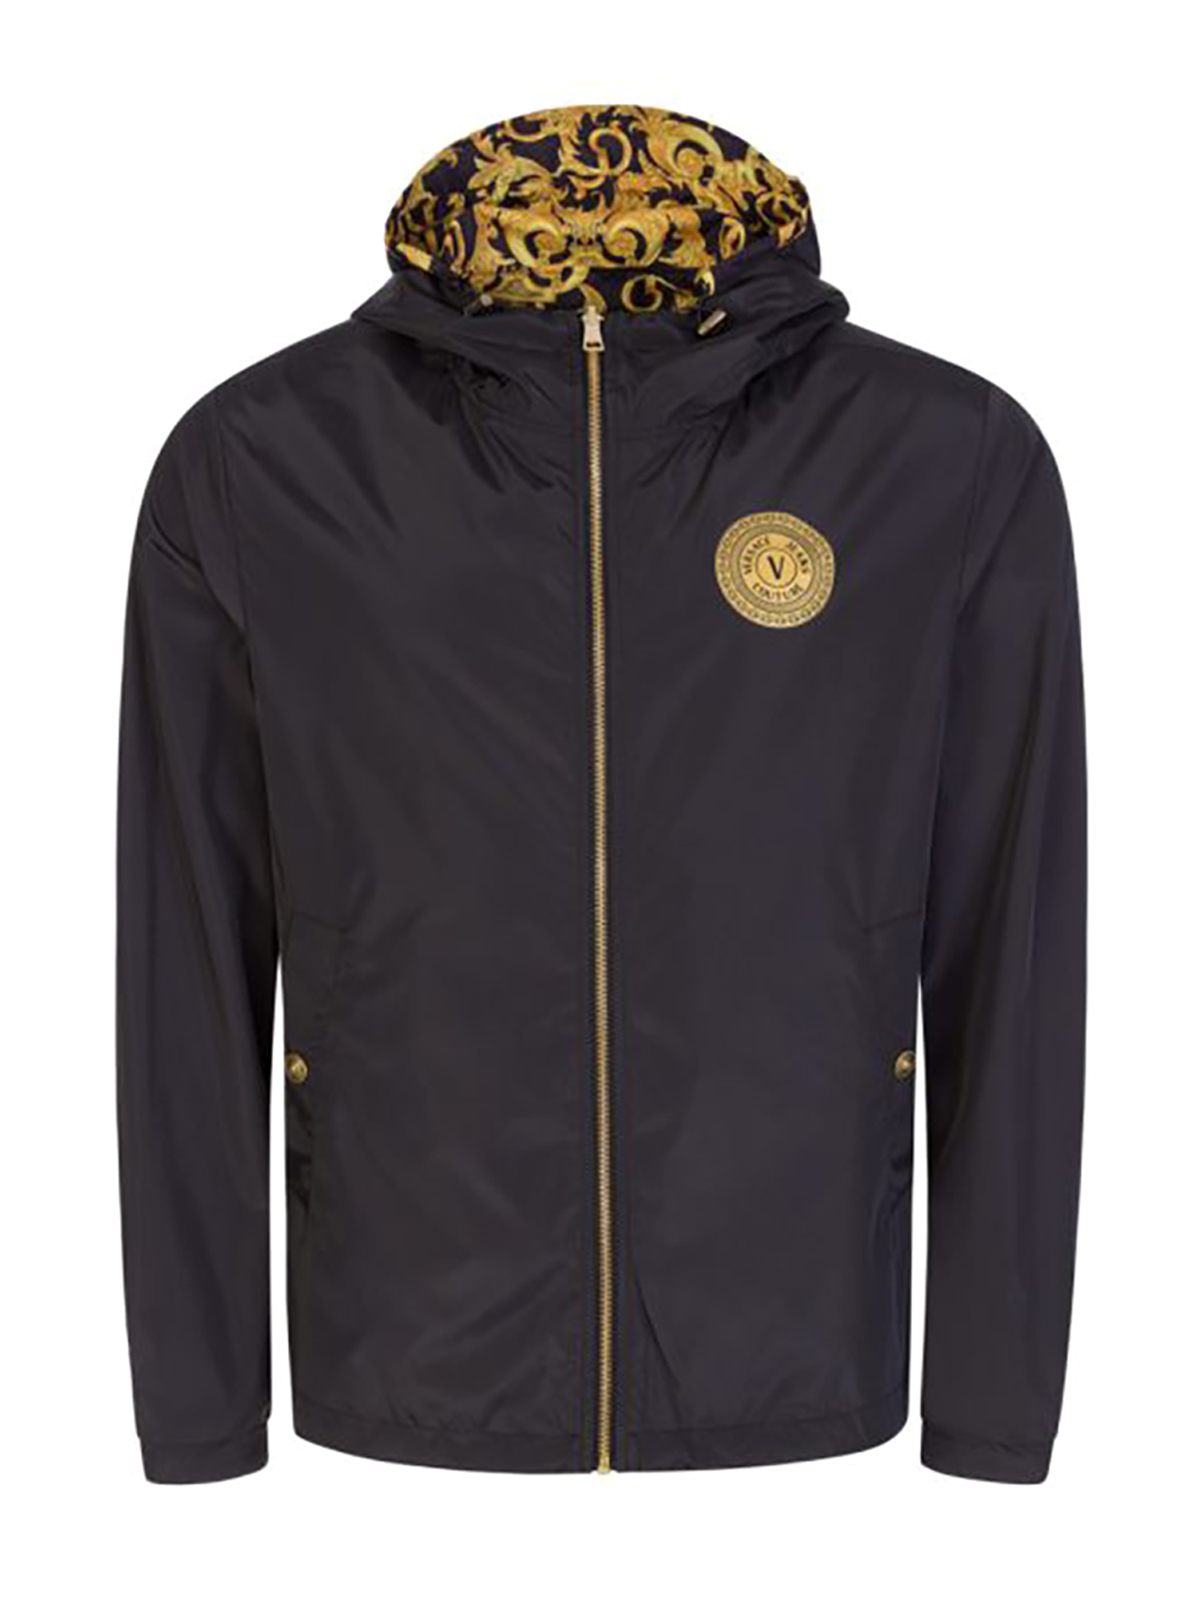 Versace Jeans - Reversible nylon jacket in baroque print - casual ...